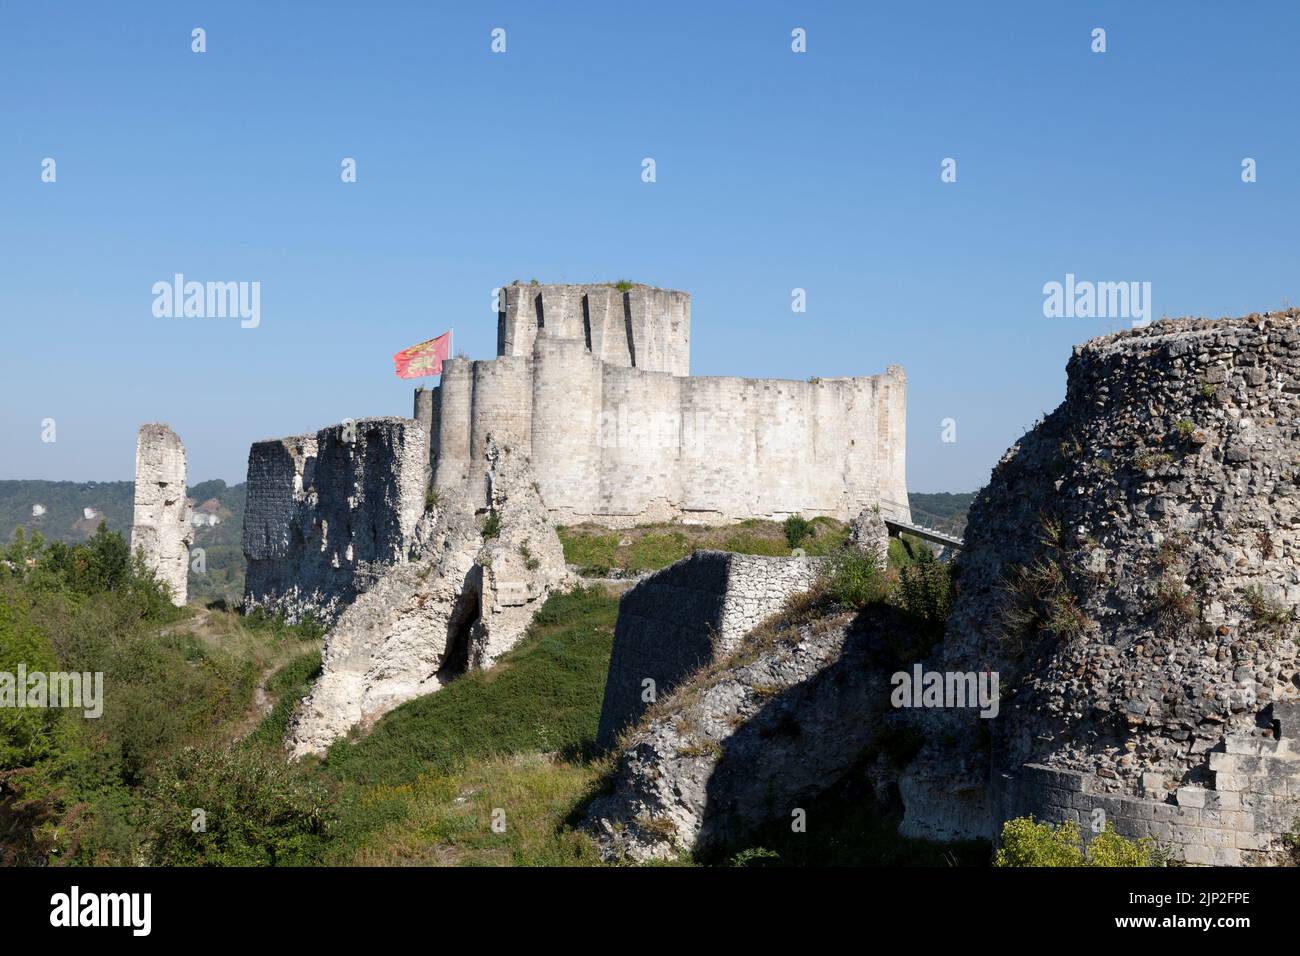 The Château-Gaillard is an old fortified castle built at the end of the 12th century, now in ruins, the remains of which stand in the French town of Stock Photo